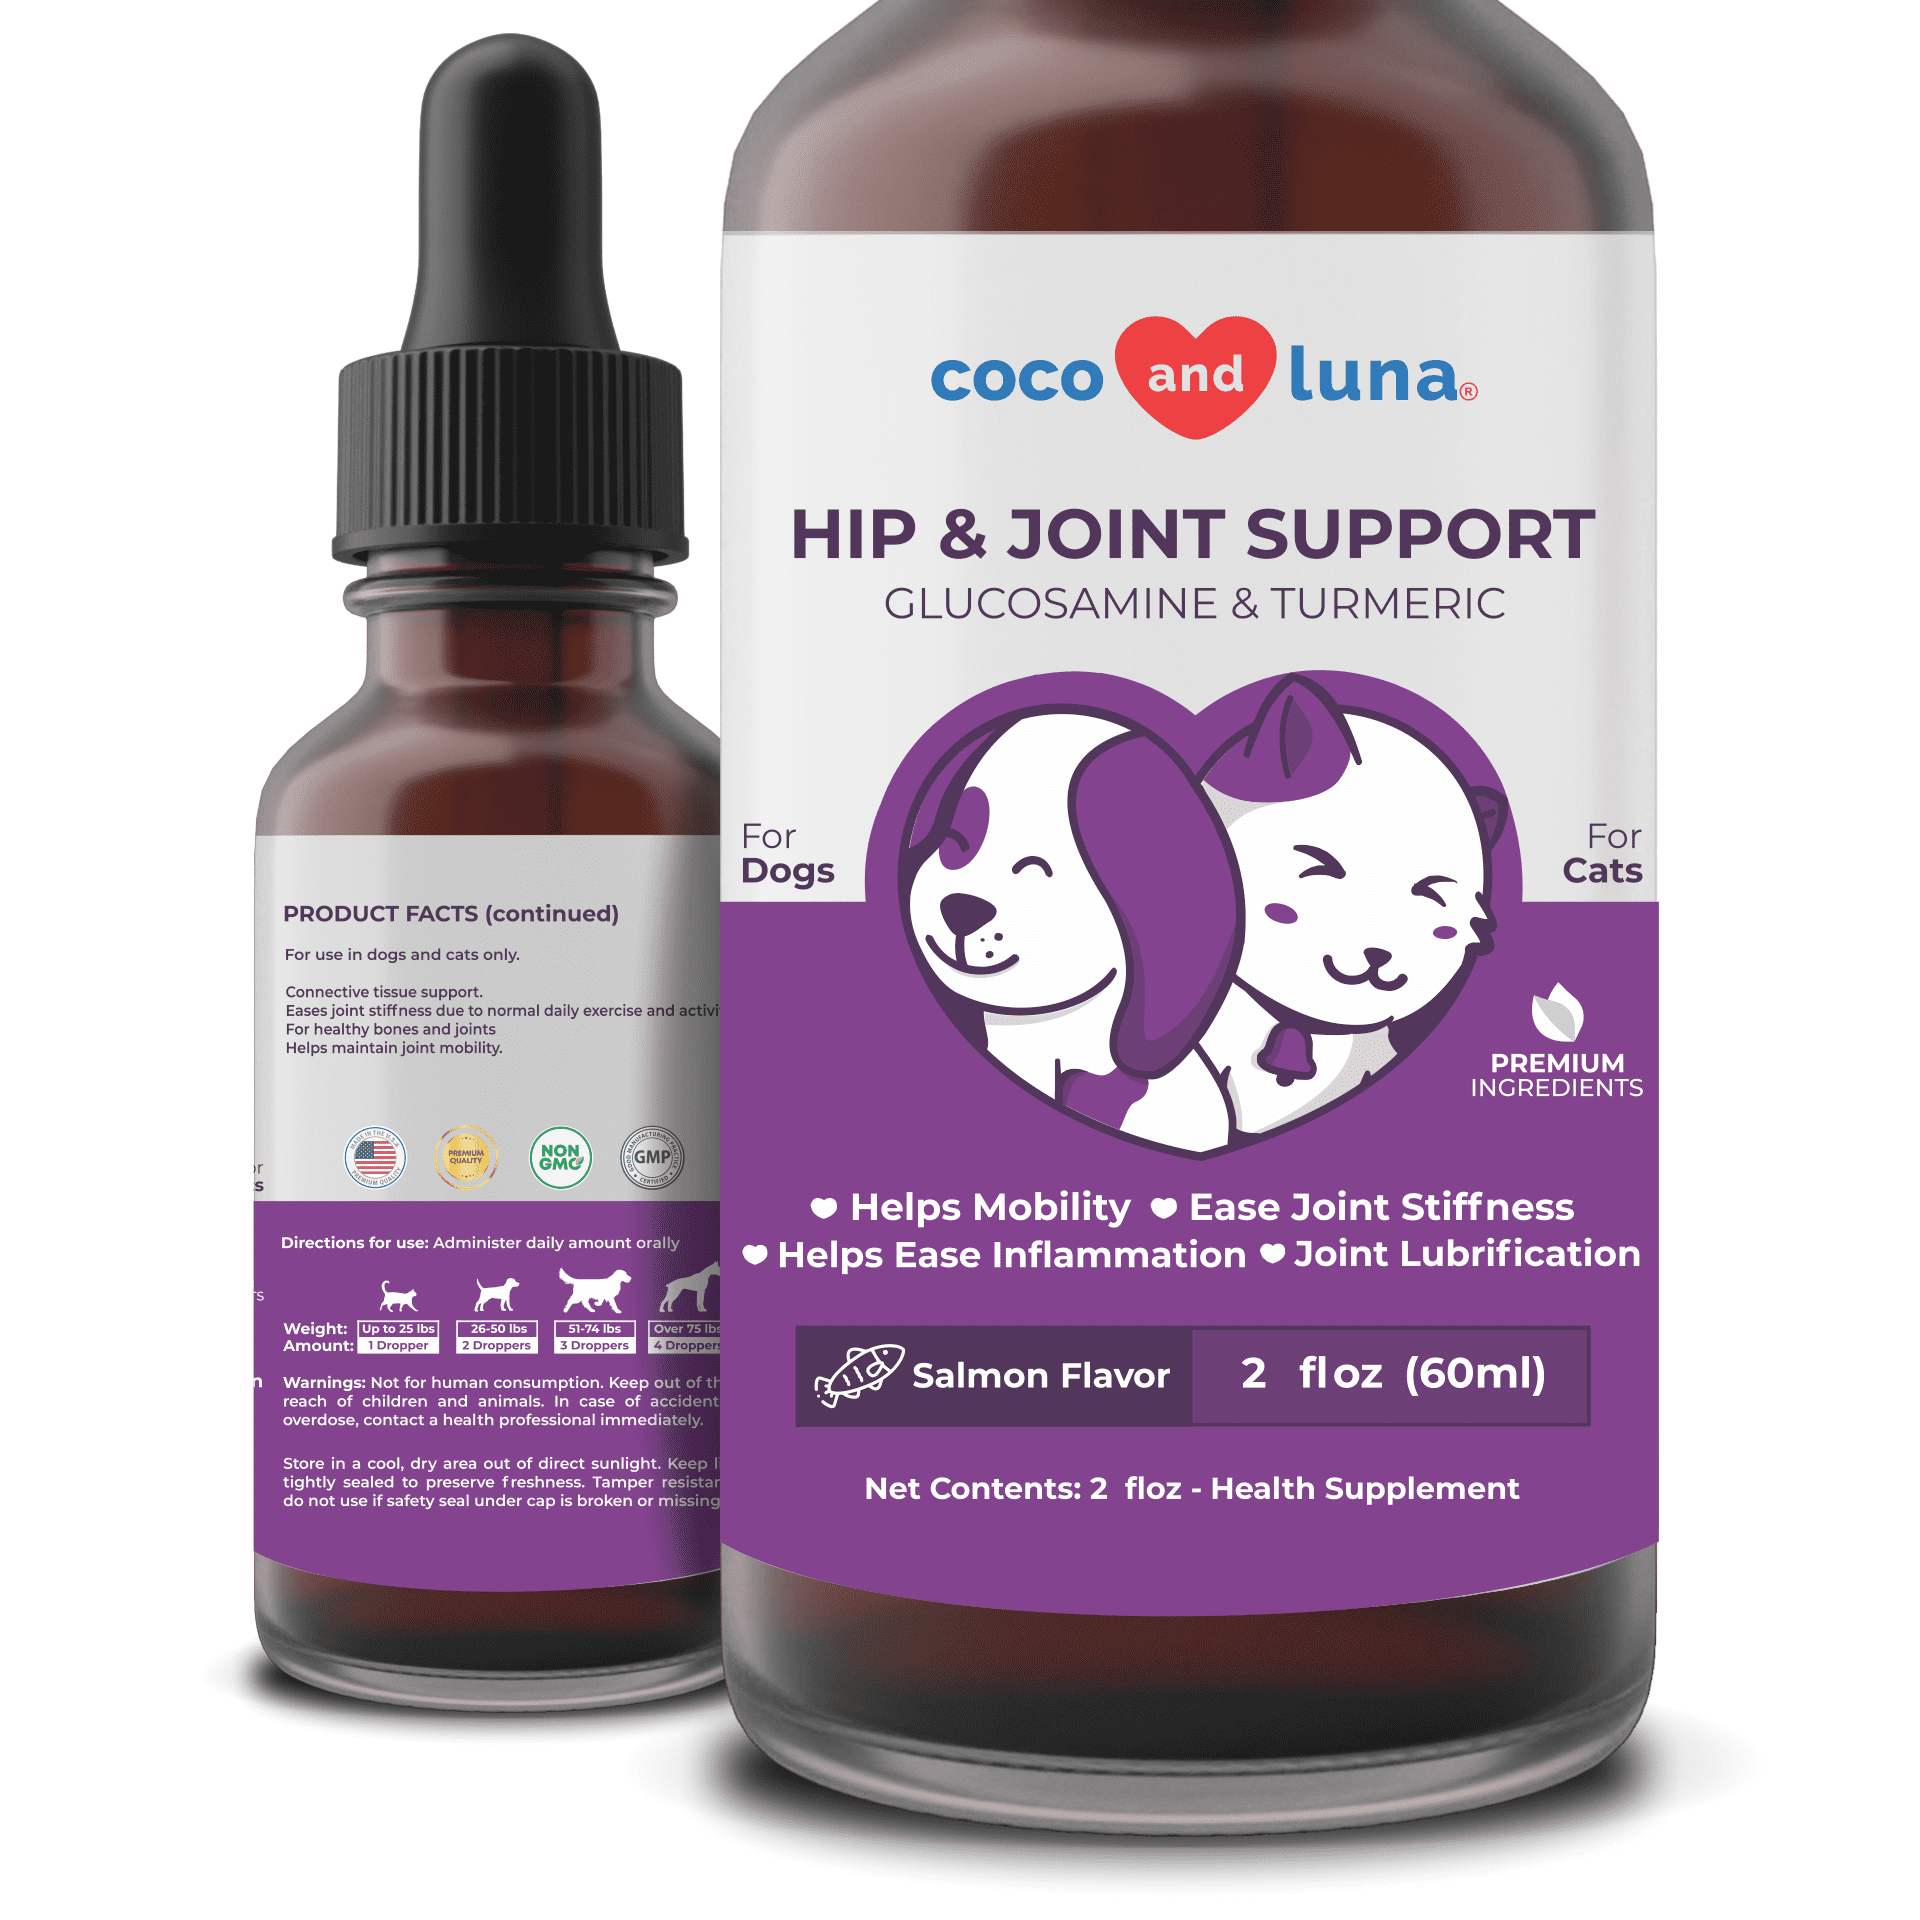 Hip and Joint Support for Dogs and Cats - 2 oz (60ml) - Coco and Luna